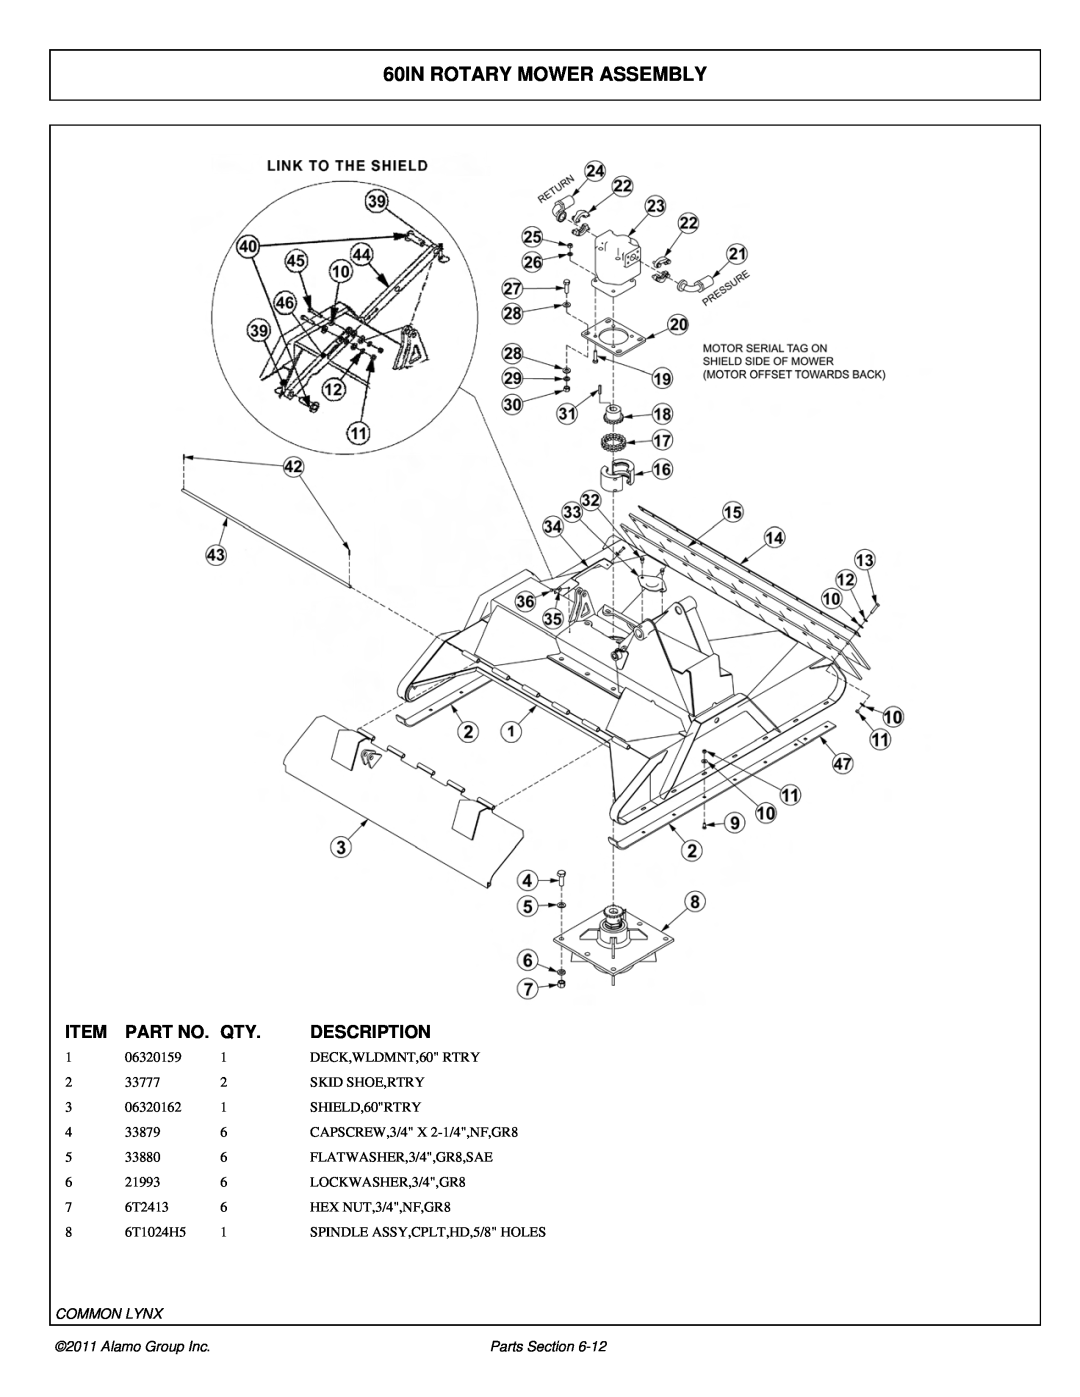 Tiger Products Co., Ltd 5083E, 5093E 60IN ROTARY MOWER ASSEMBLY, Item, Part No, Description, Common Lynx, Alamo Group Inc 